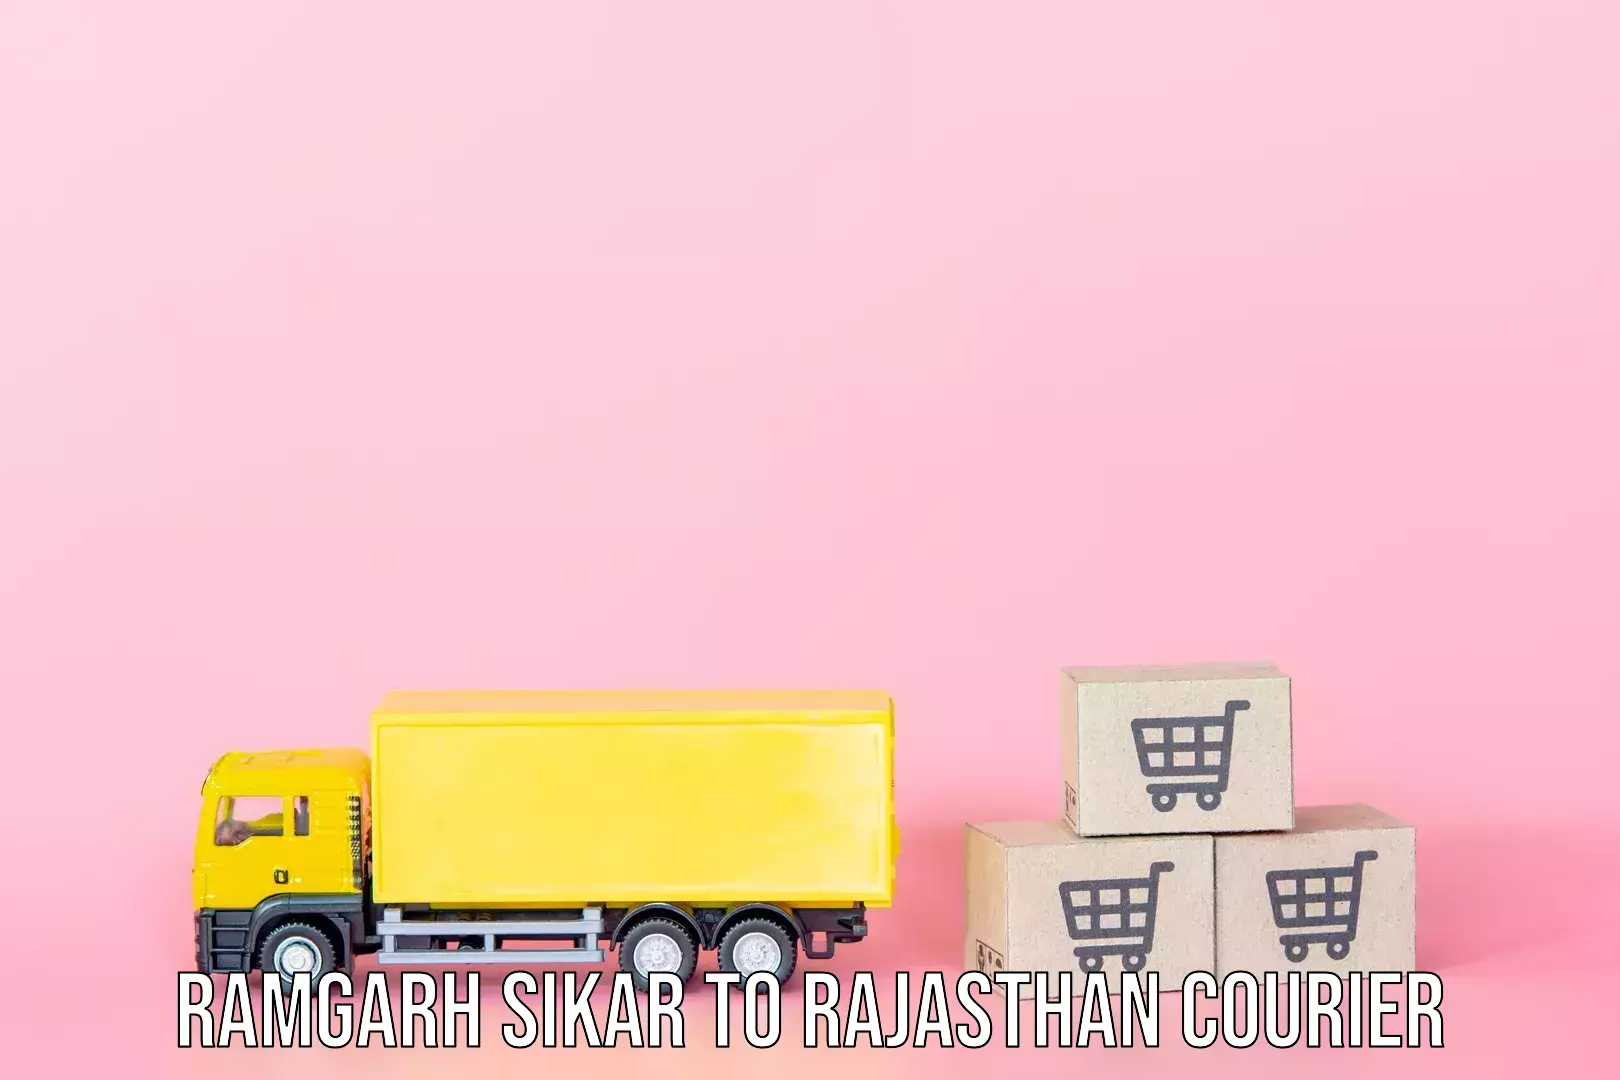 Luggage delivery operations Ramgarh Sikar to Fatehpur Sikar